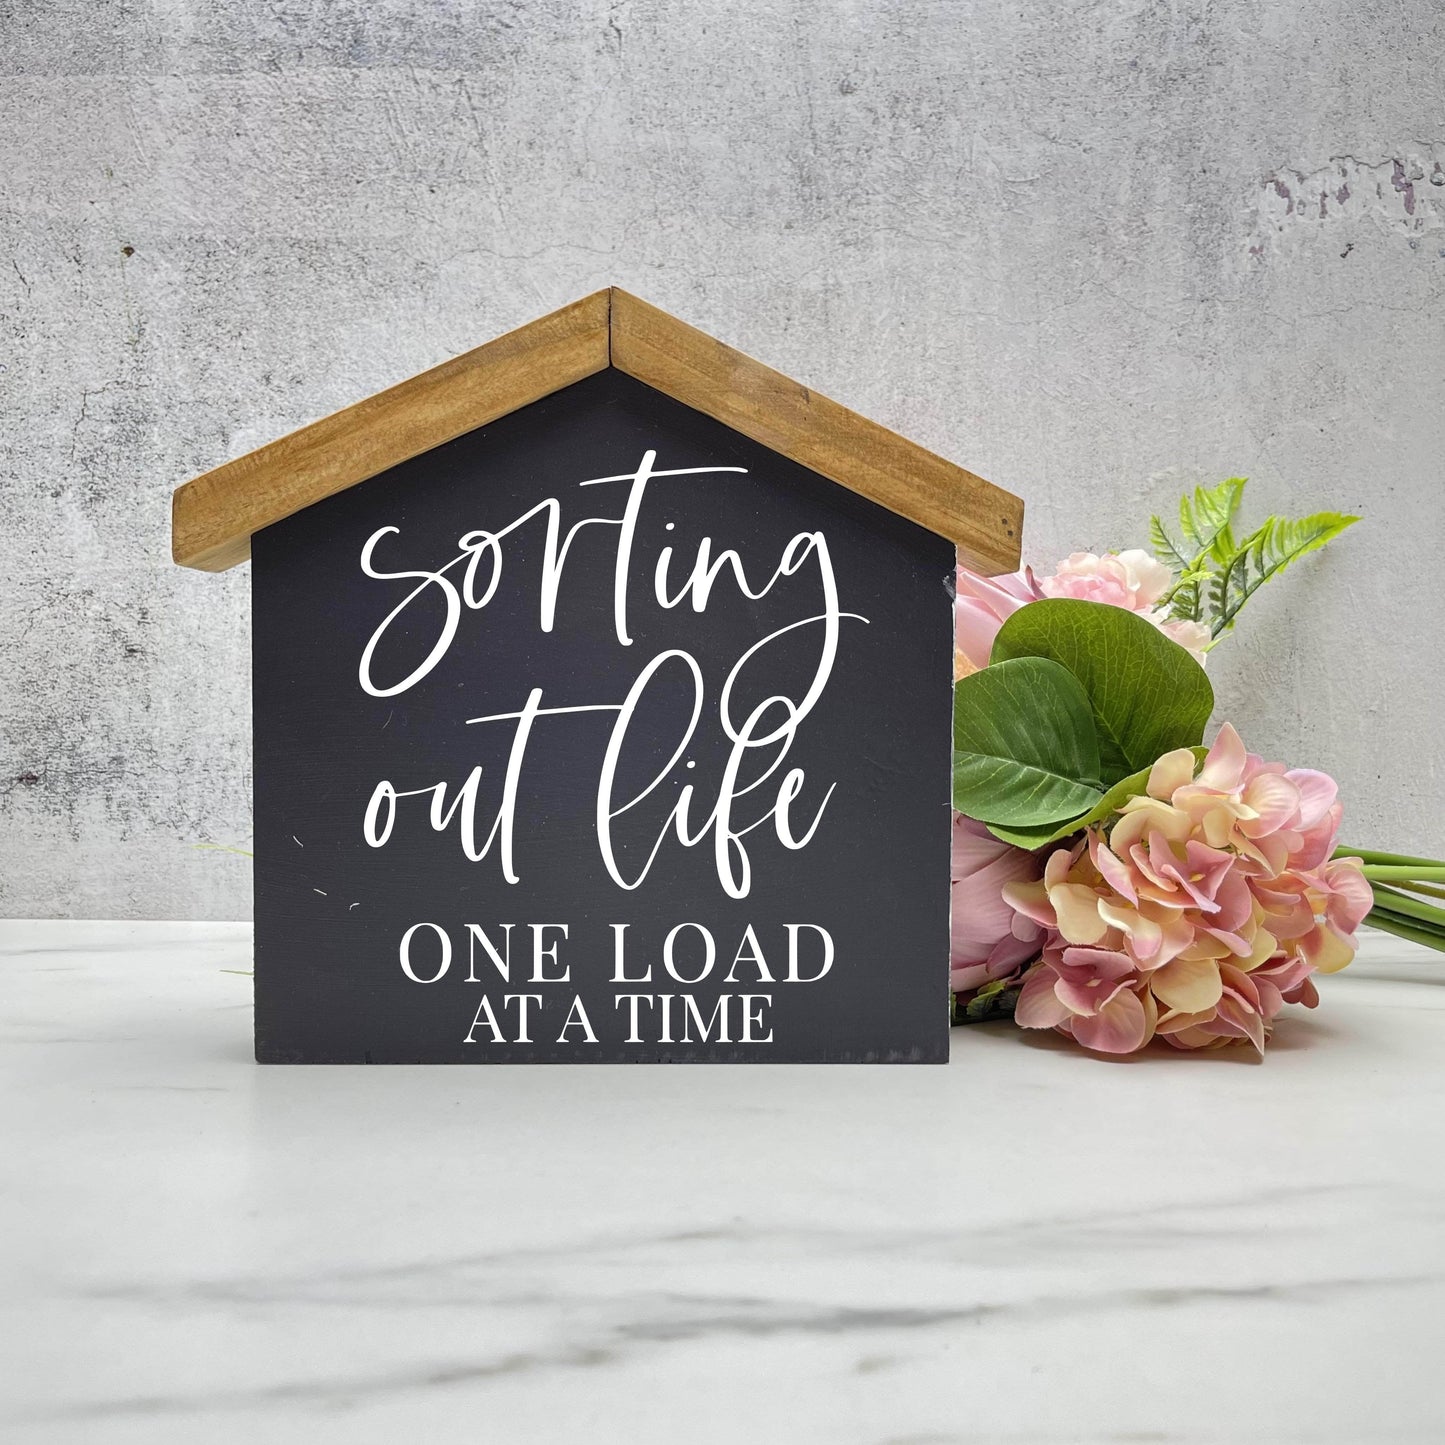 The best days sign, House laundry wood sign, laundry decor, home decor